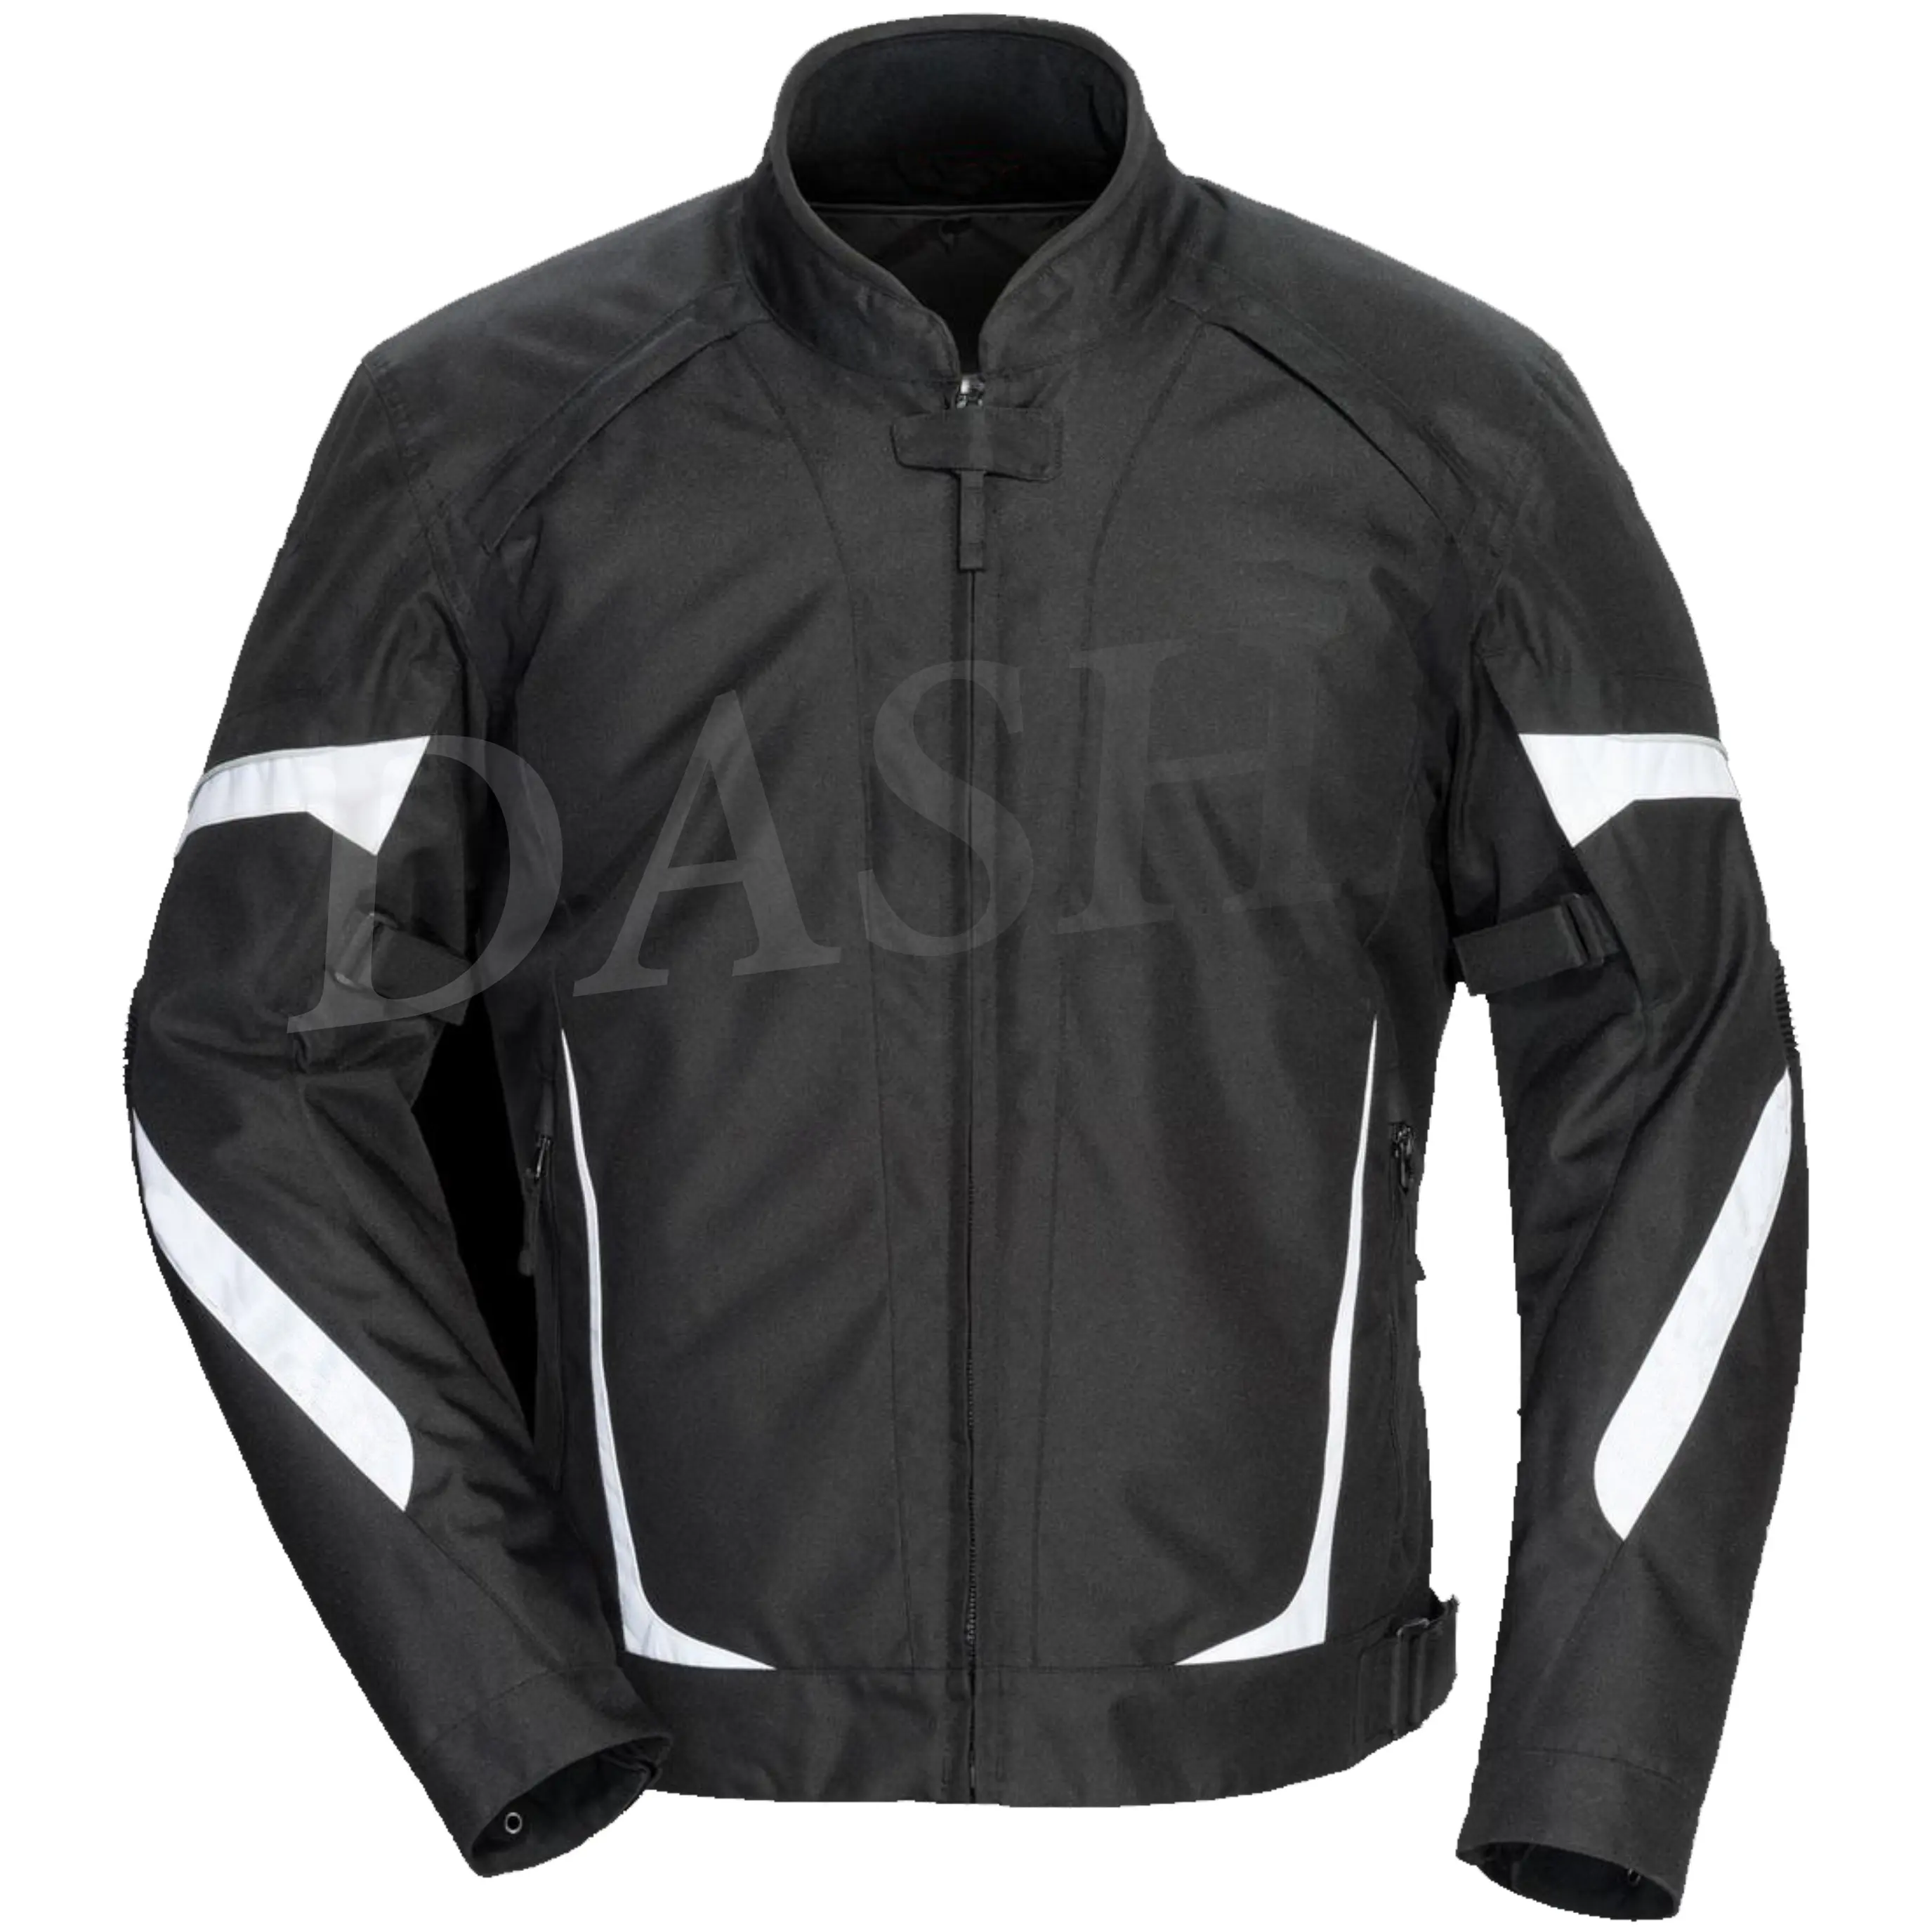 High Quality Solid Colour Long Sleeves 100% Waterproof Fabric Wind II Motorcycle Jacket for Men's